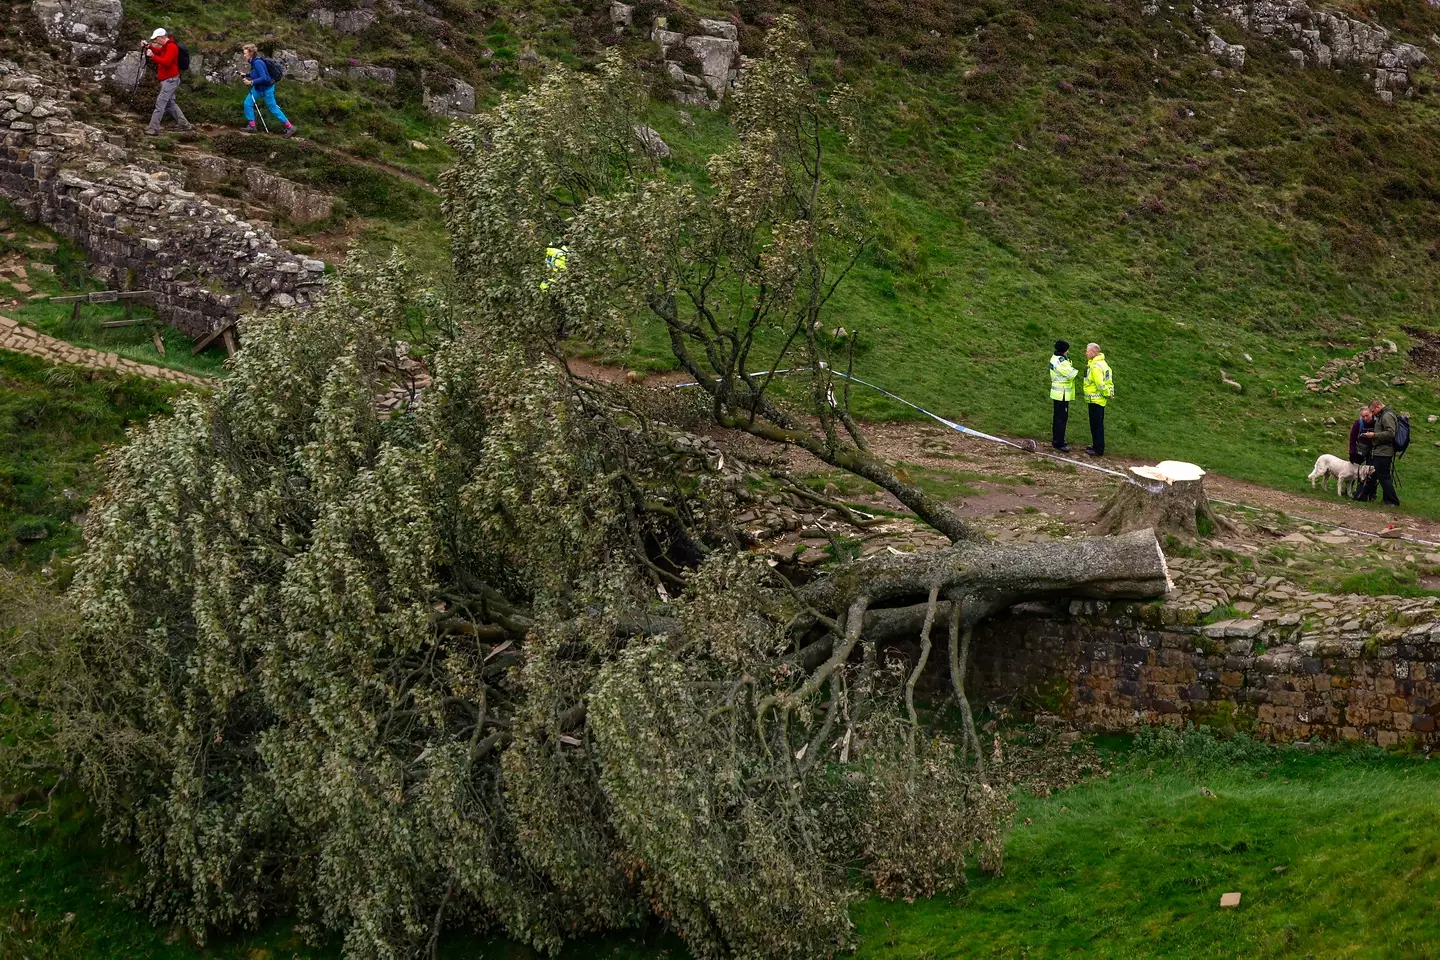 The tree was deliberately felled overnight between 27 September and 28 September.